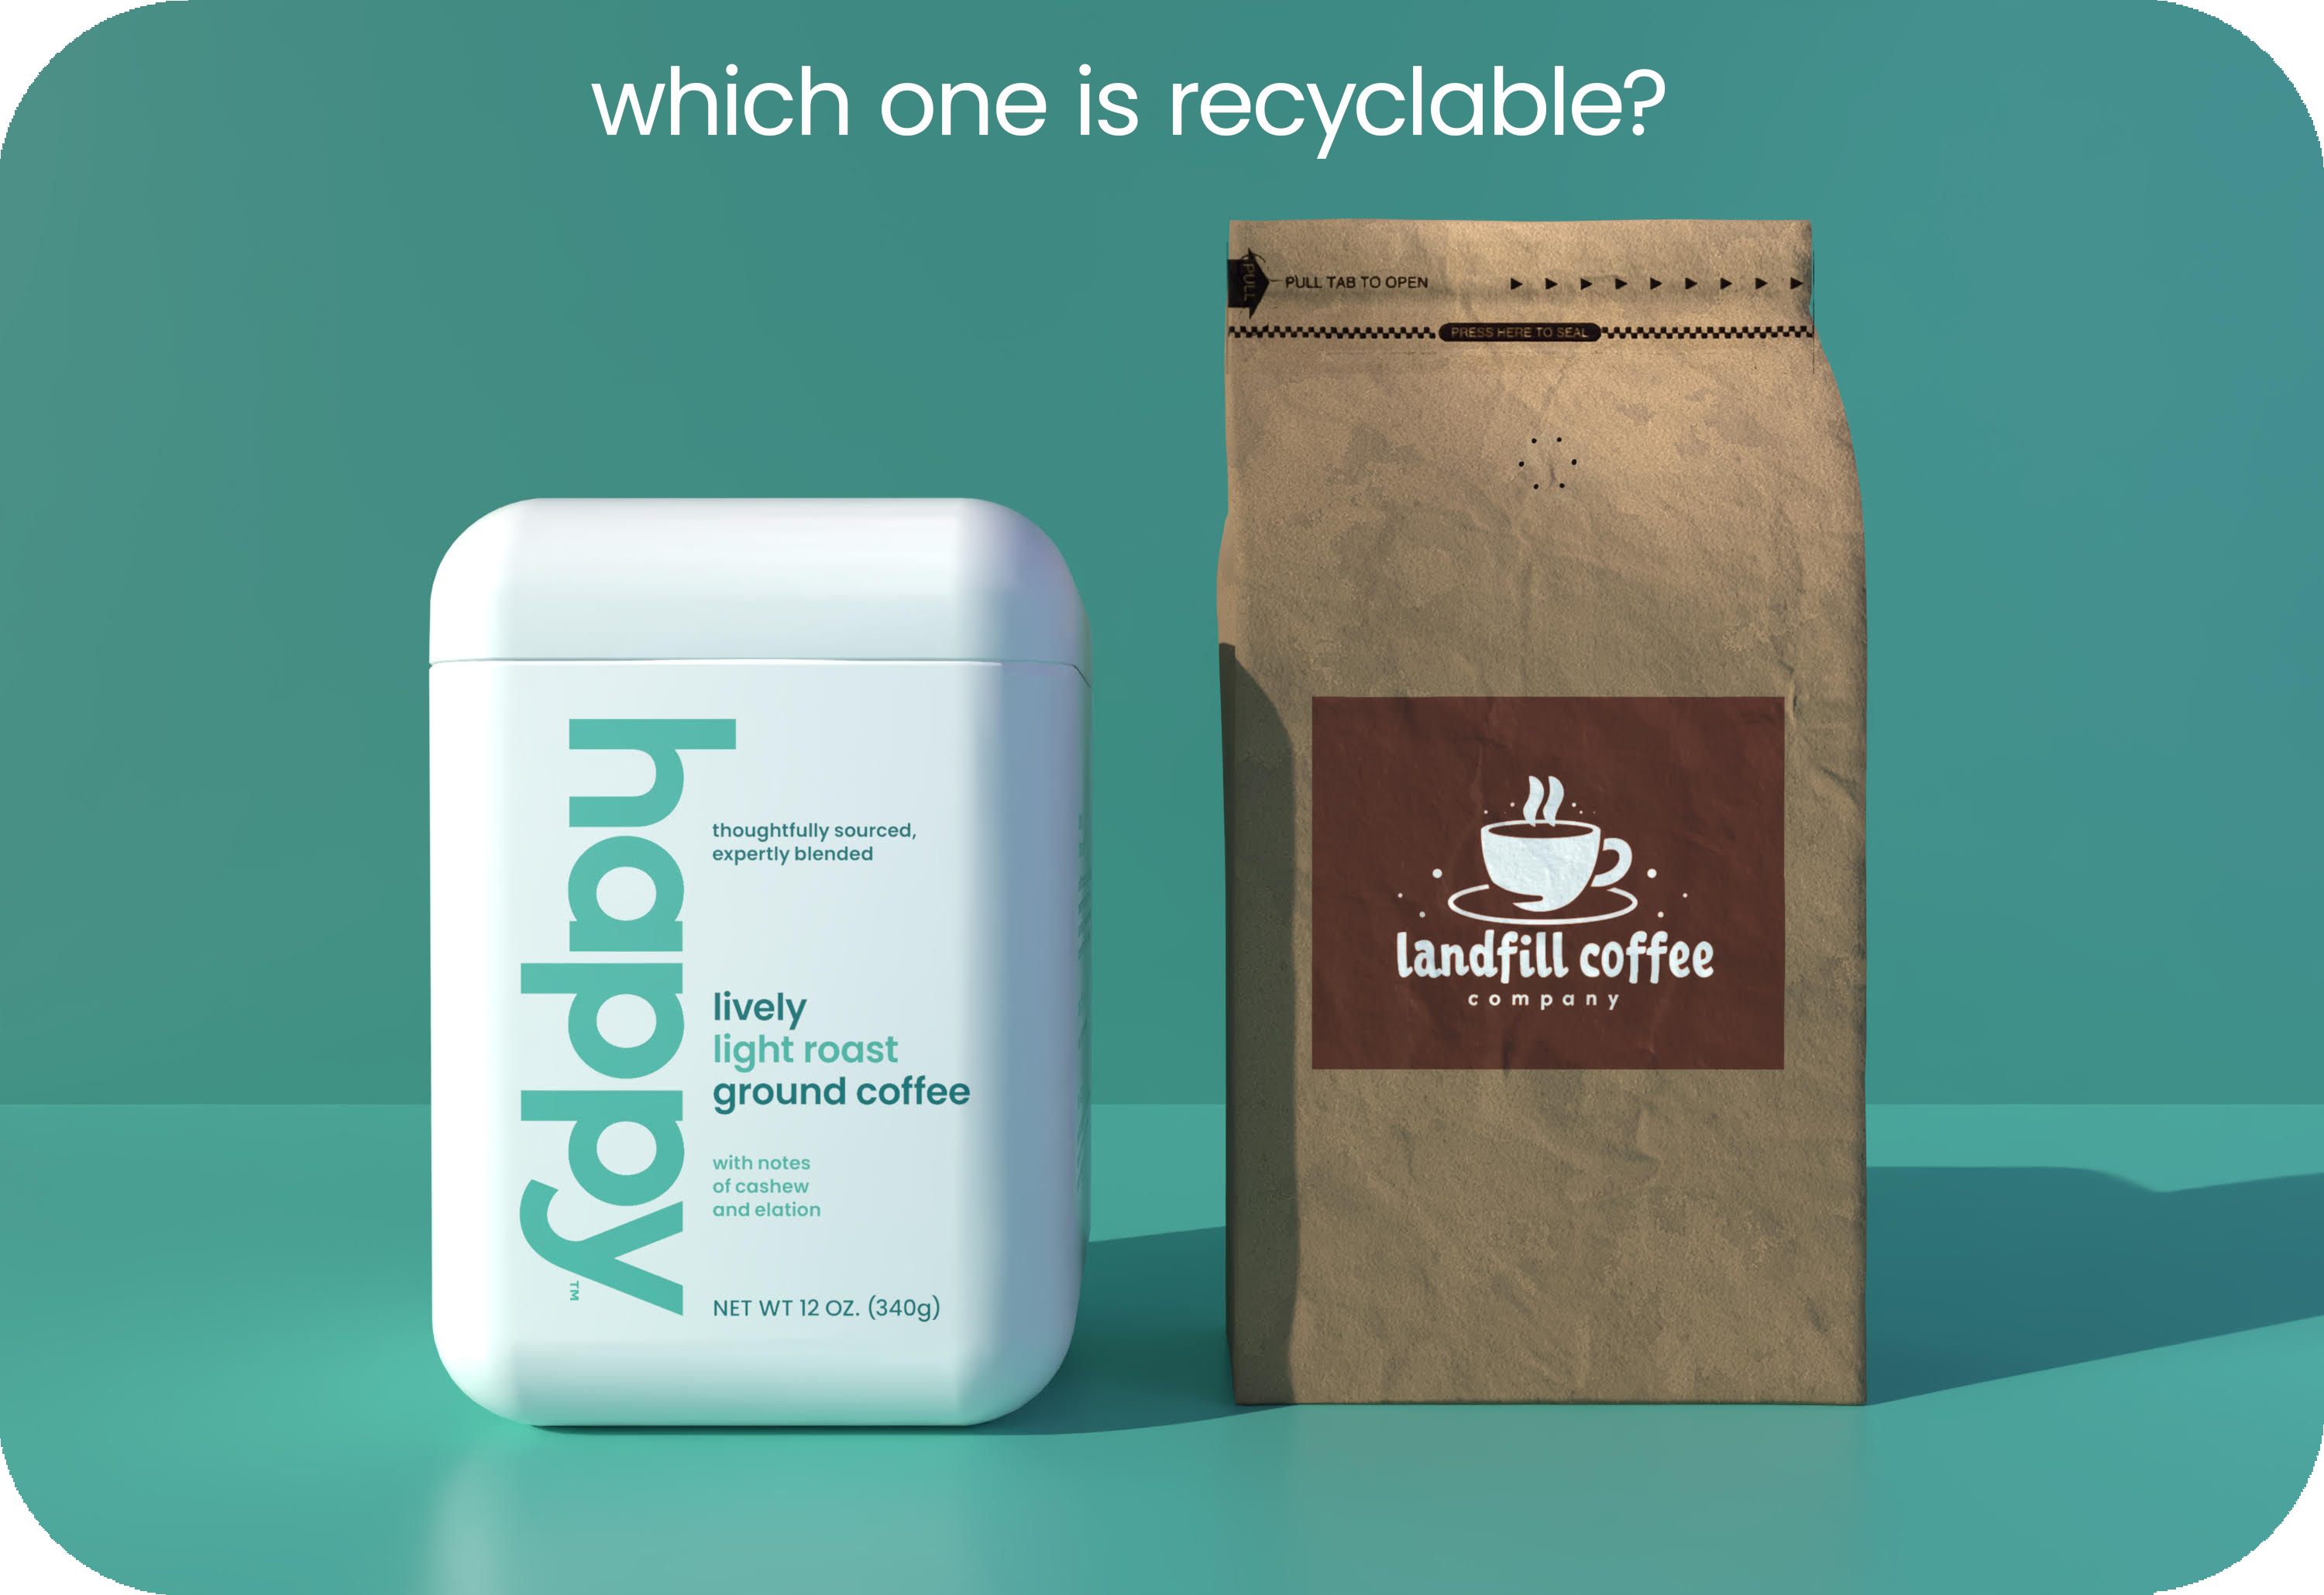 Are traditional coffee bags recyclable?